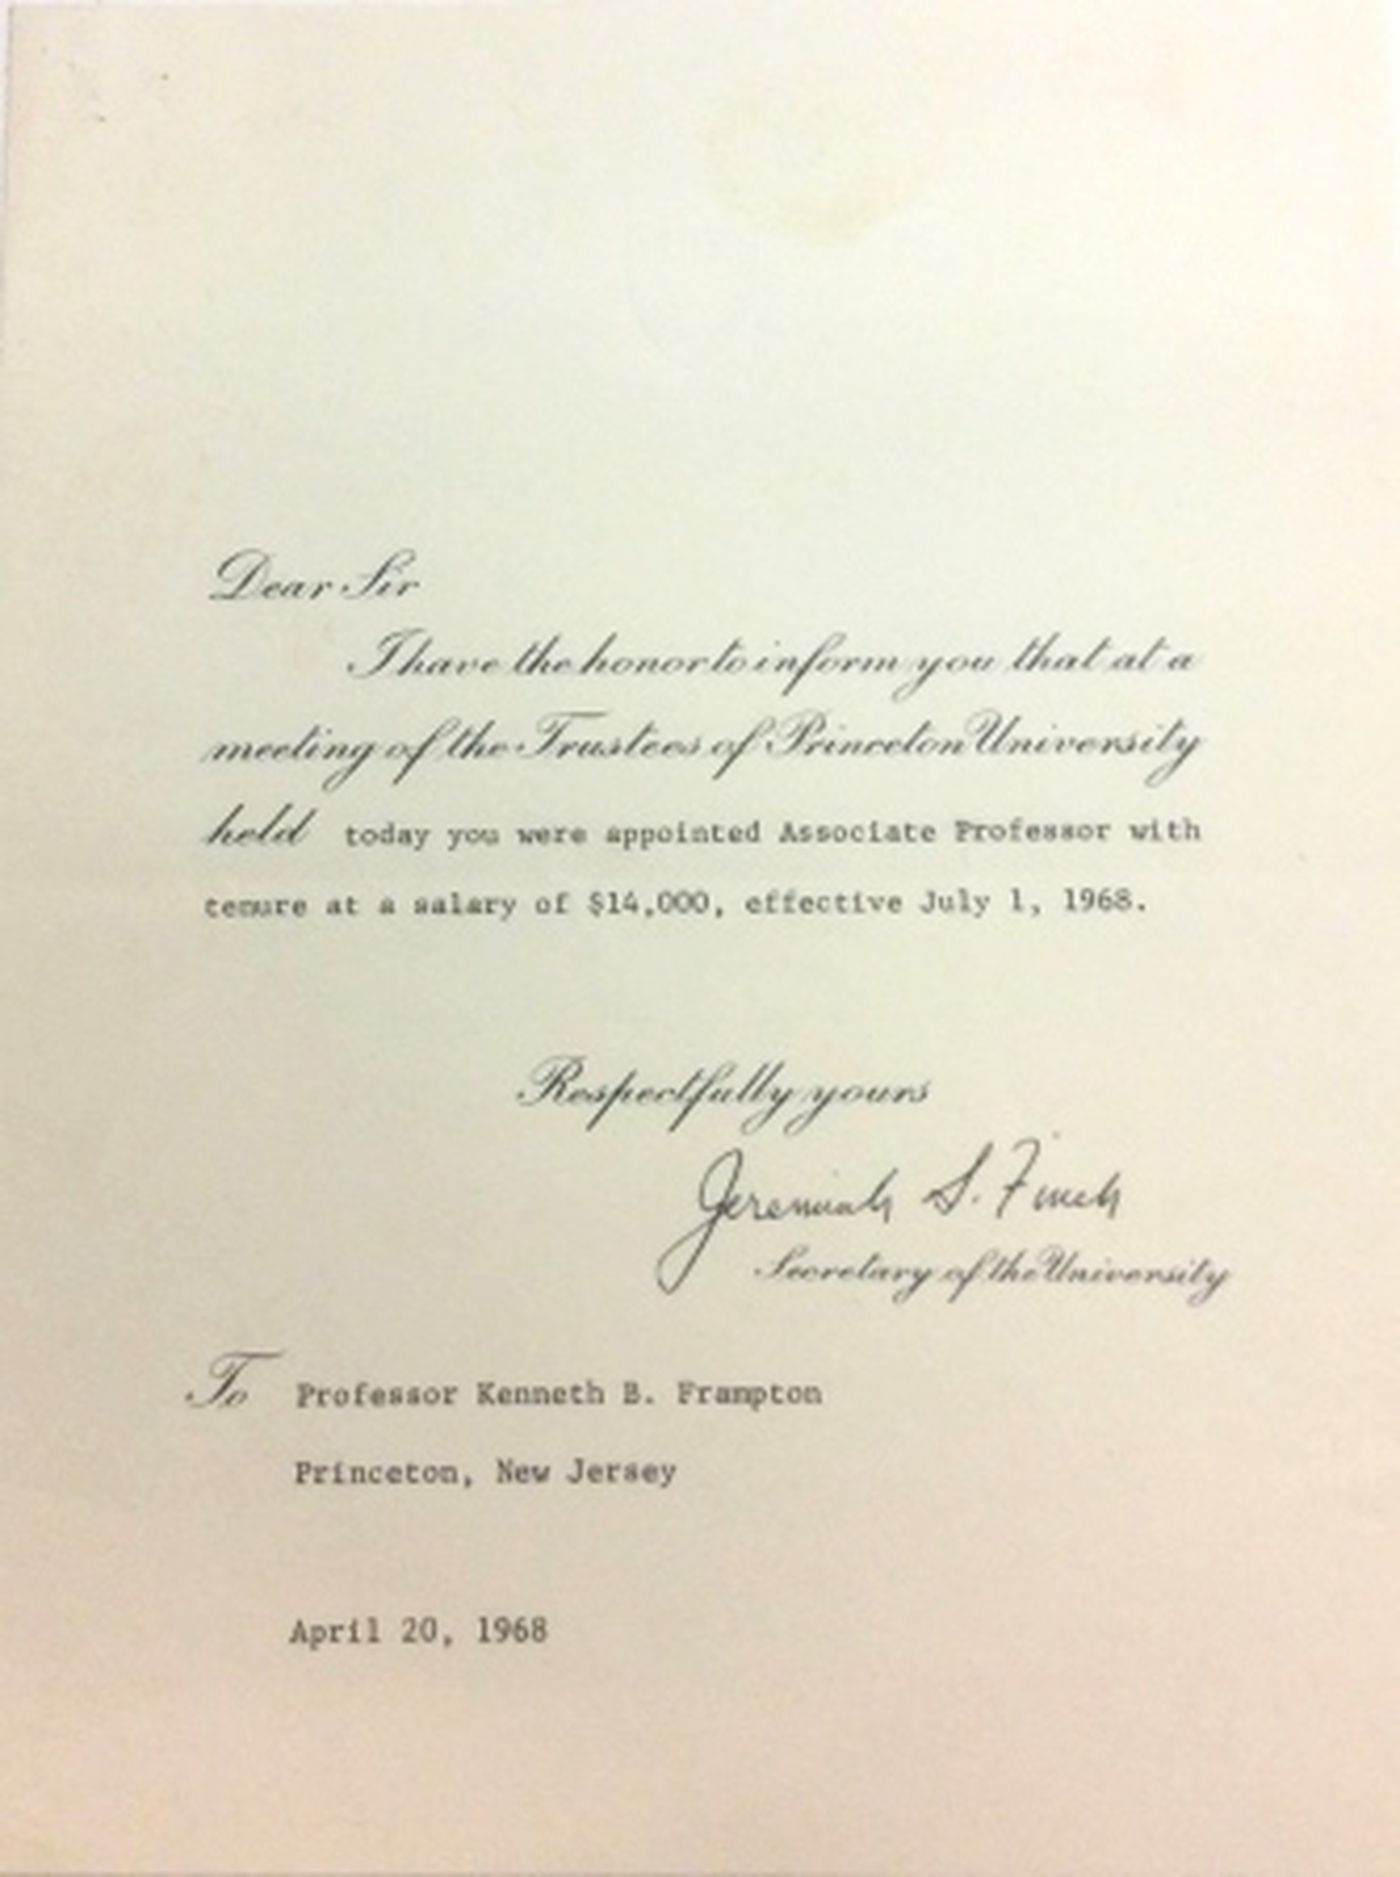 Kenneth Frampton appointment letter for Associate Professor position at Princeton University